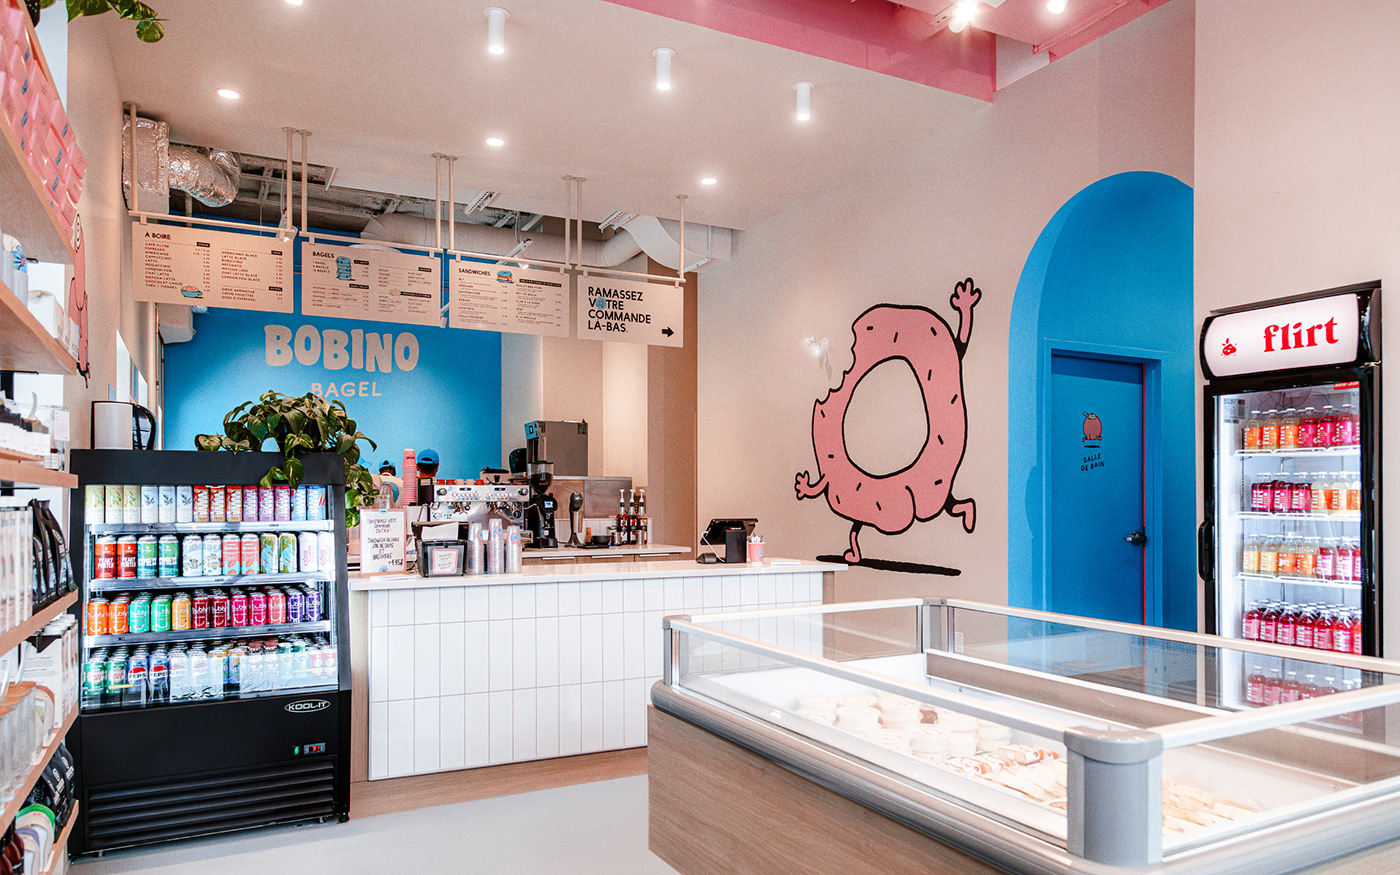 Cute bagel shop entry with a pink and blue walls. Large logo and wall art. Coffee and menu. Branded.